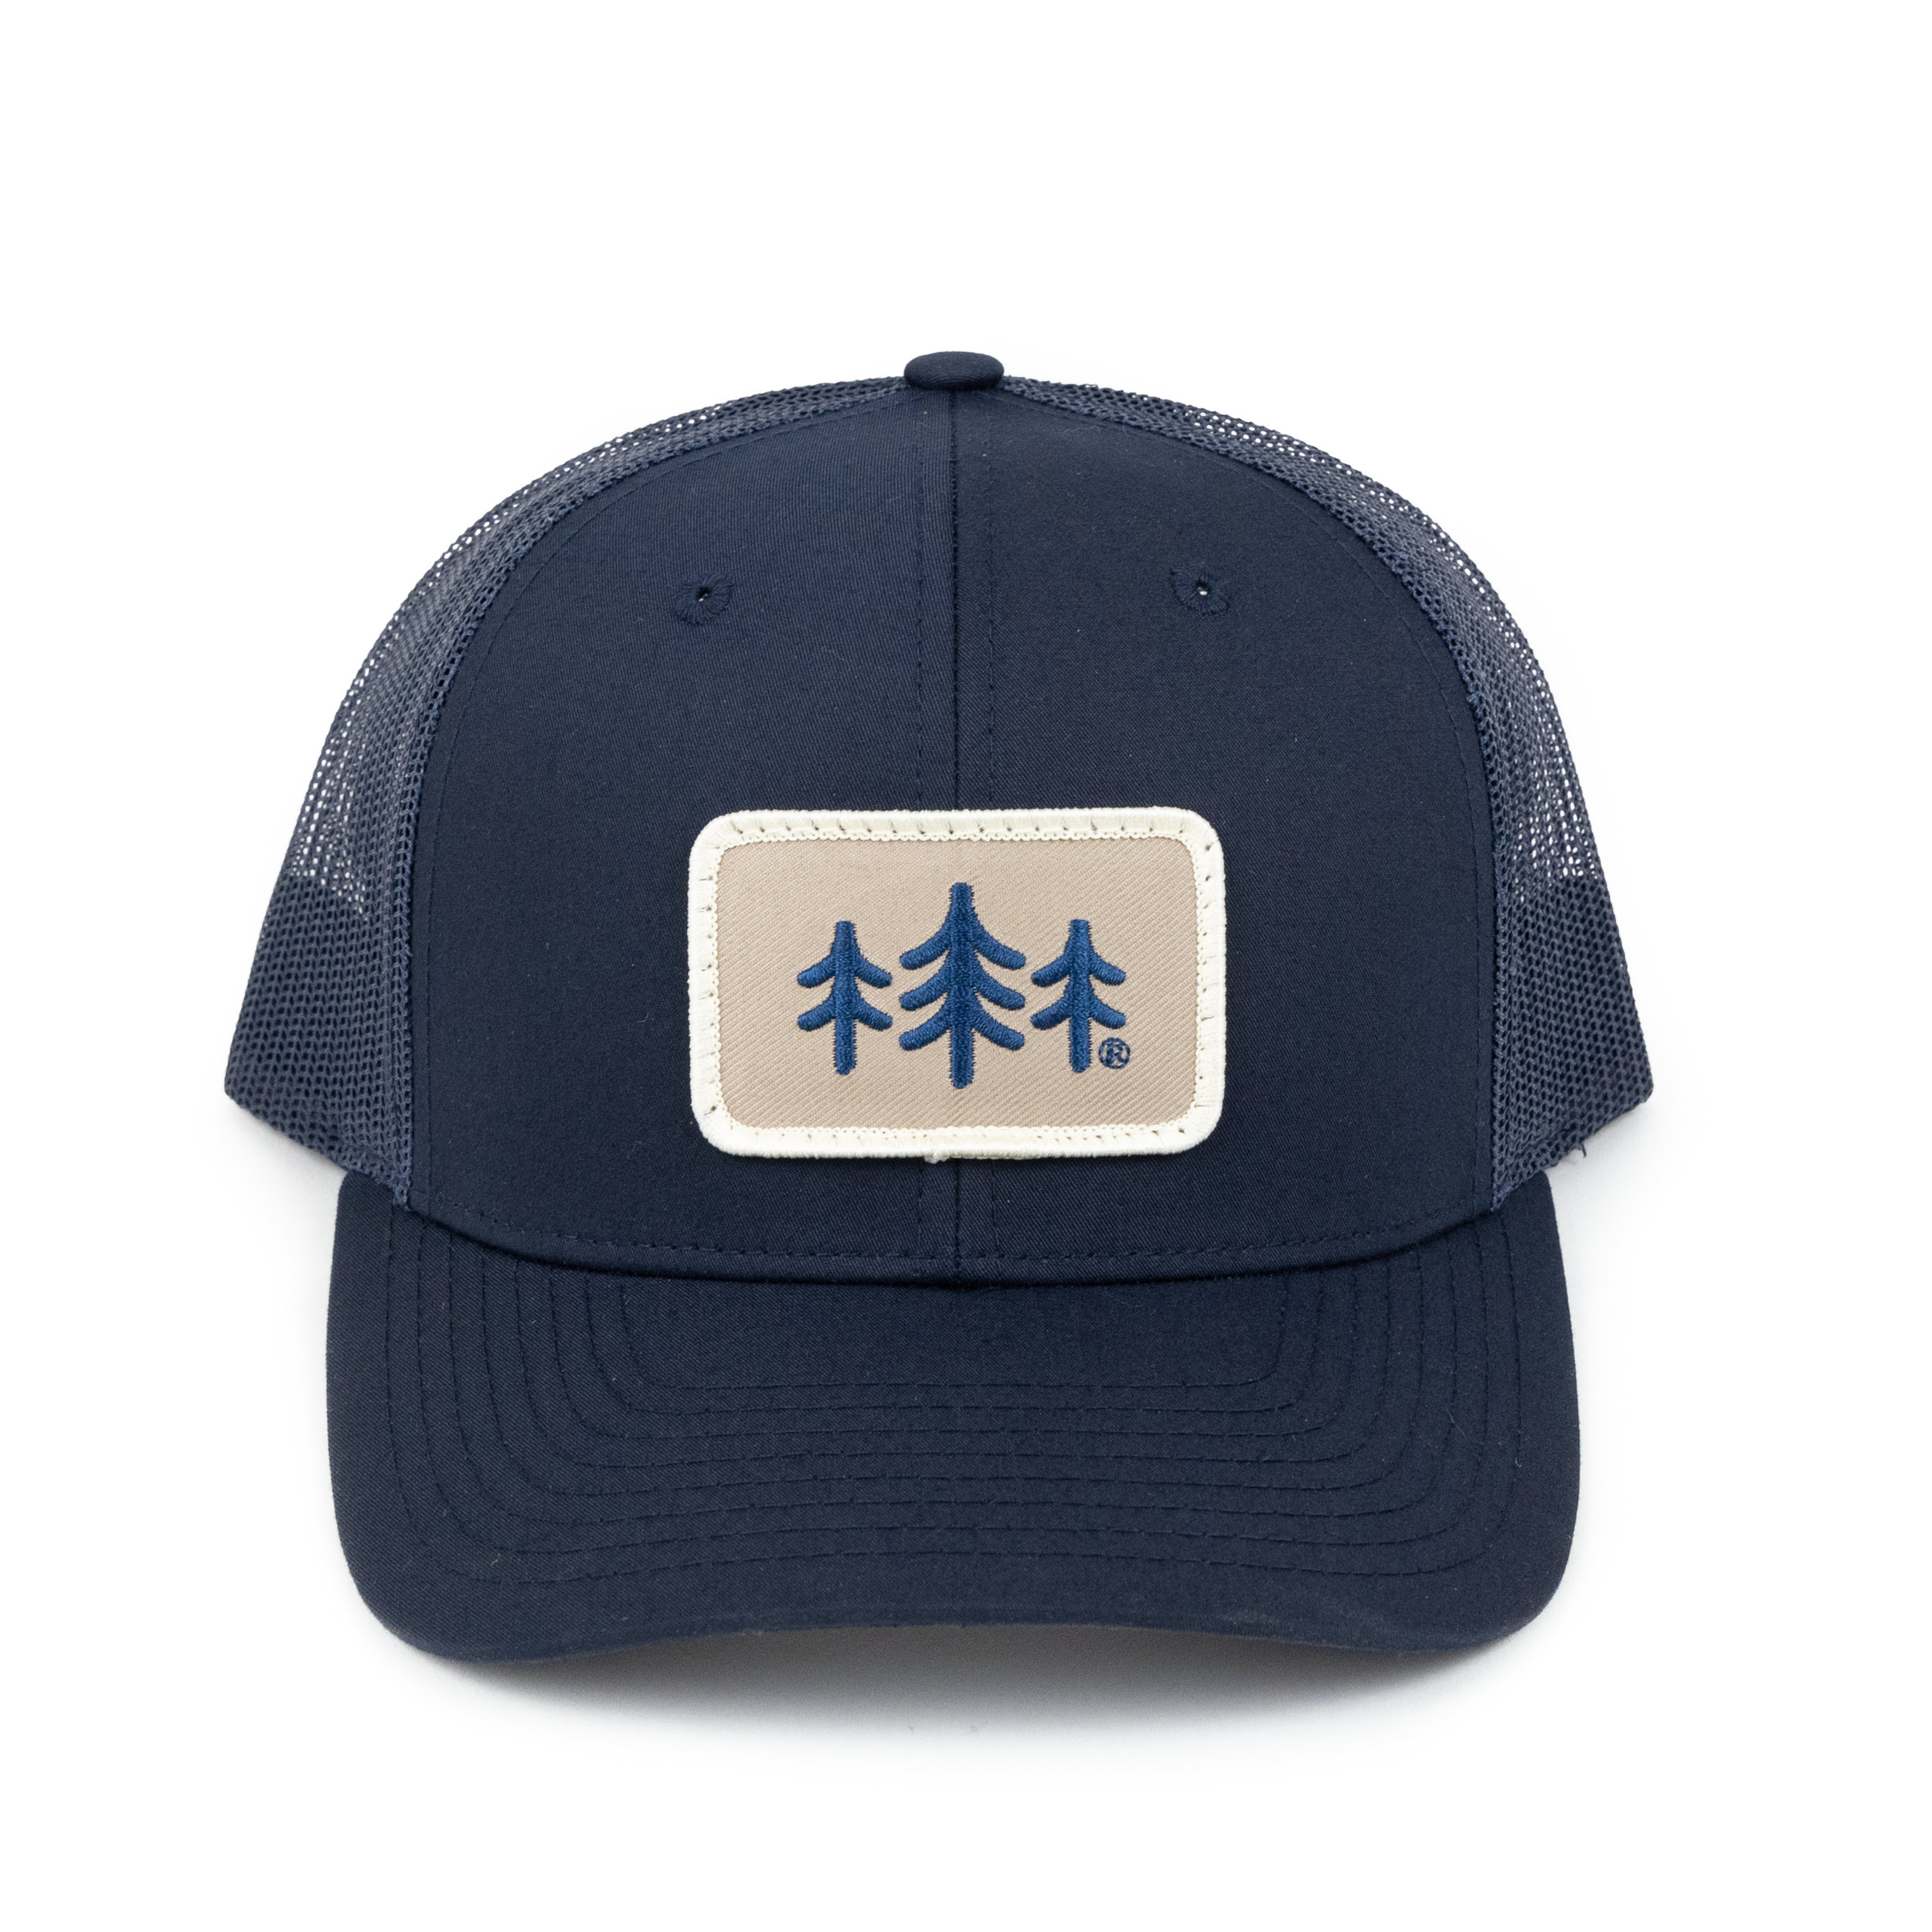 Recycled TriPine Patch Trucker Hat